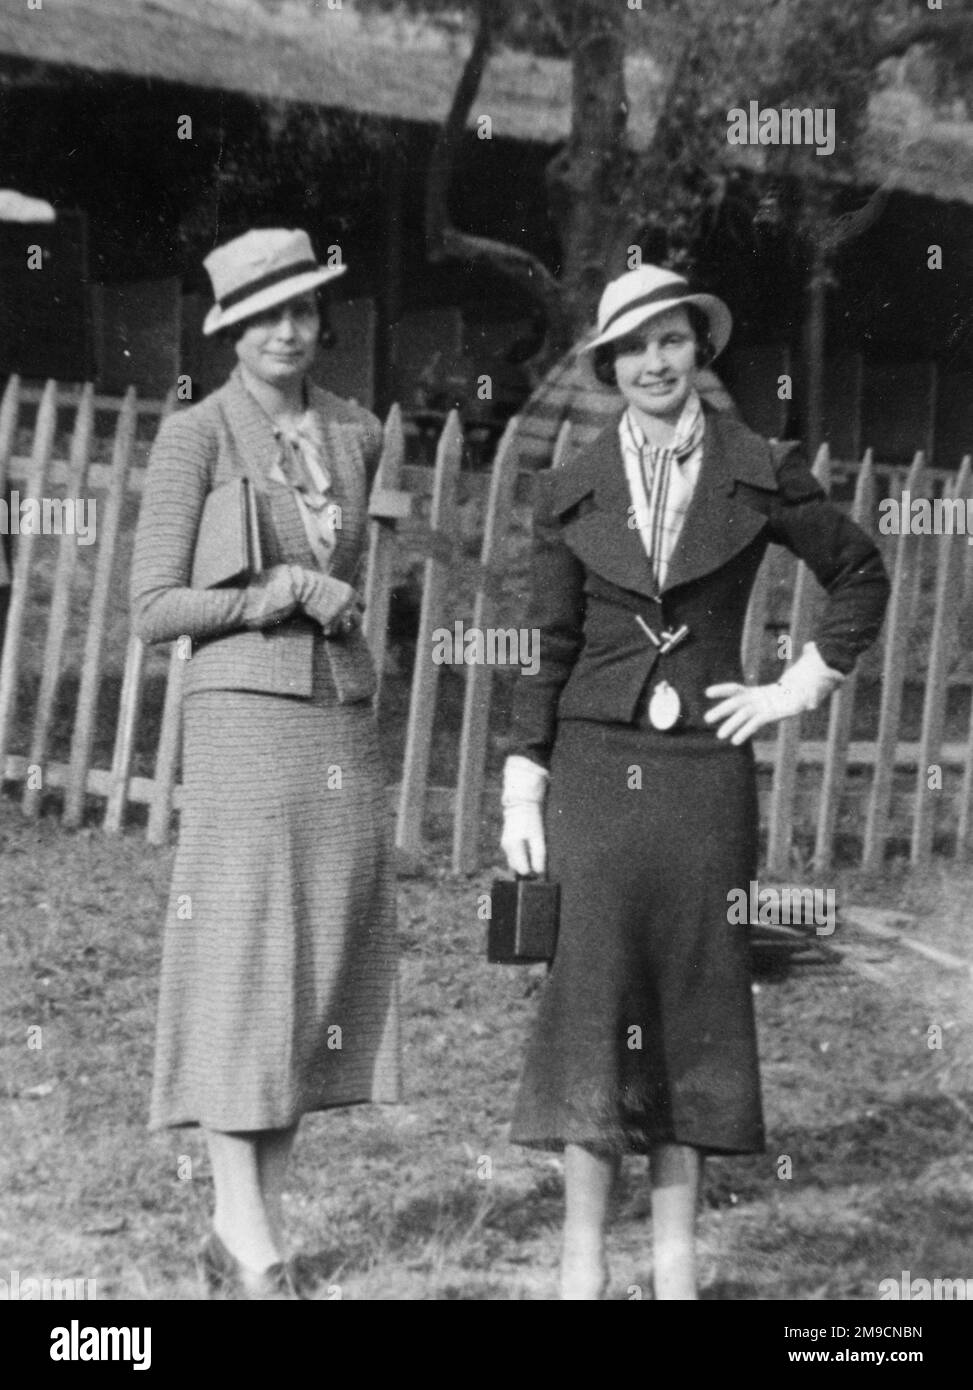 Two ladies at the races Stock Photo